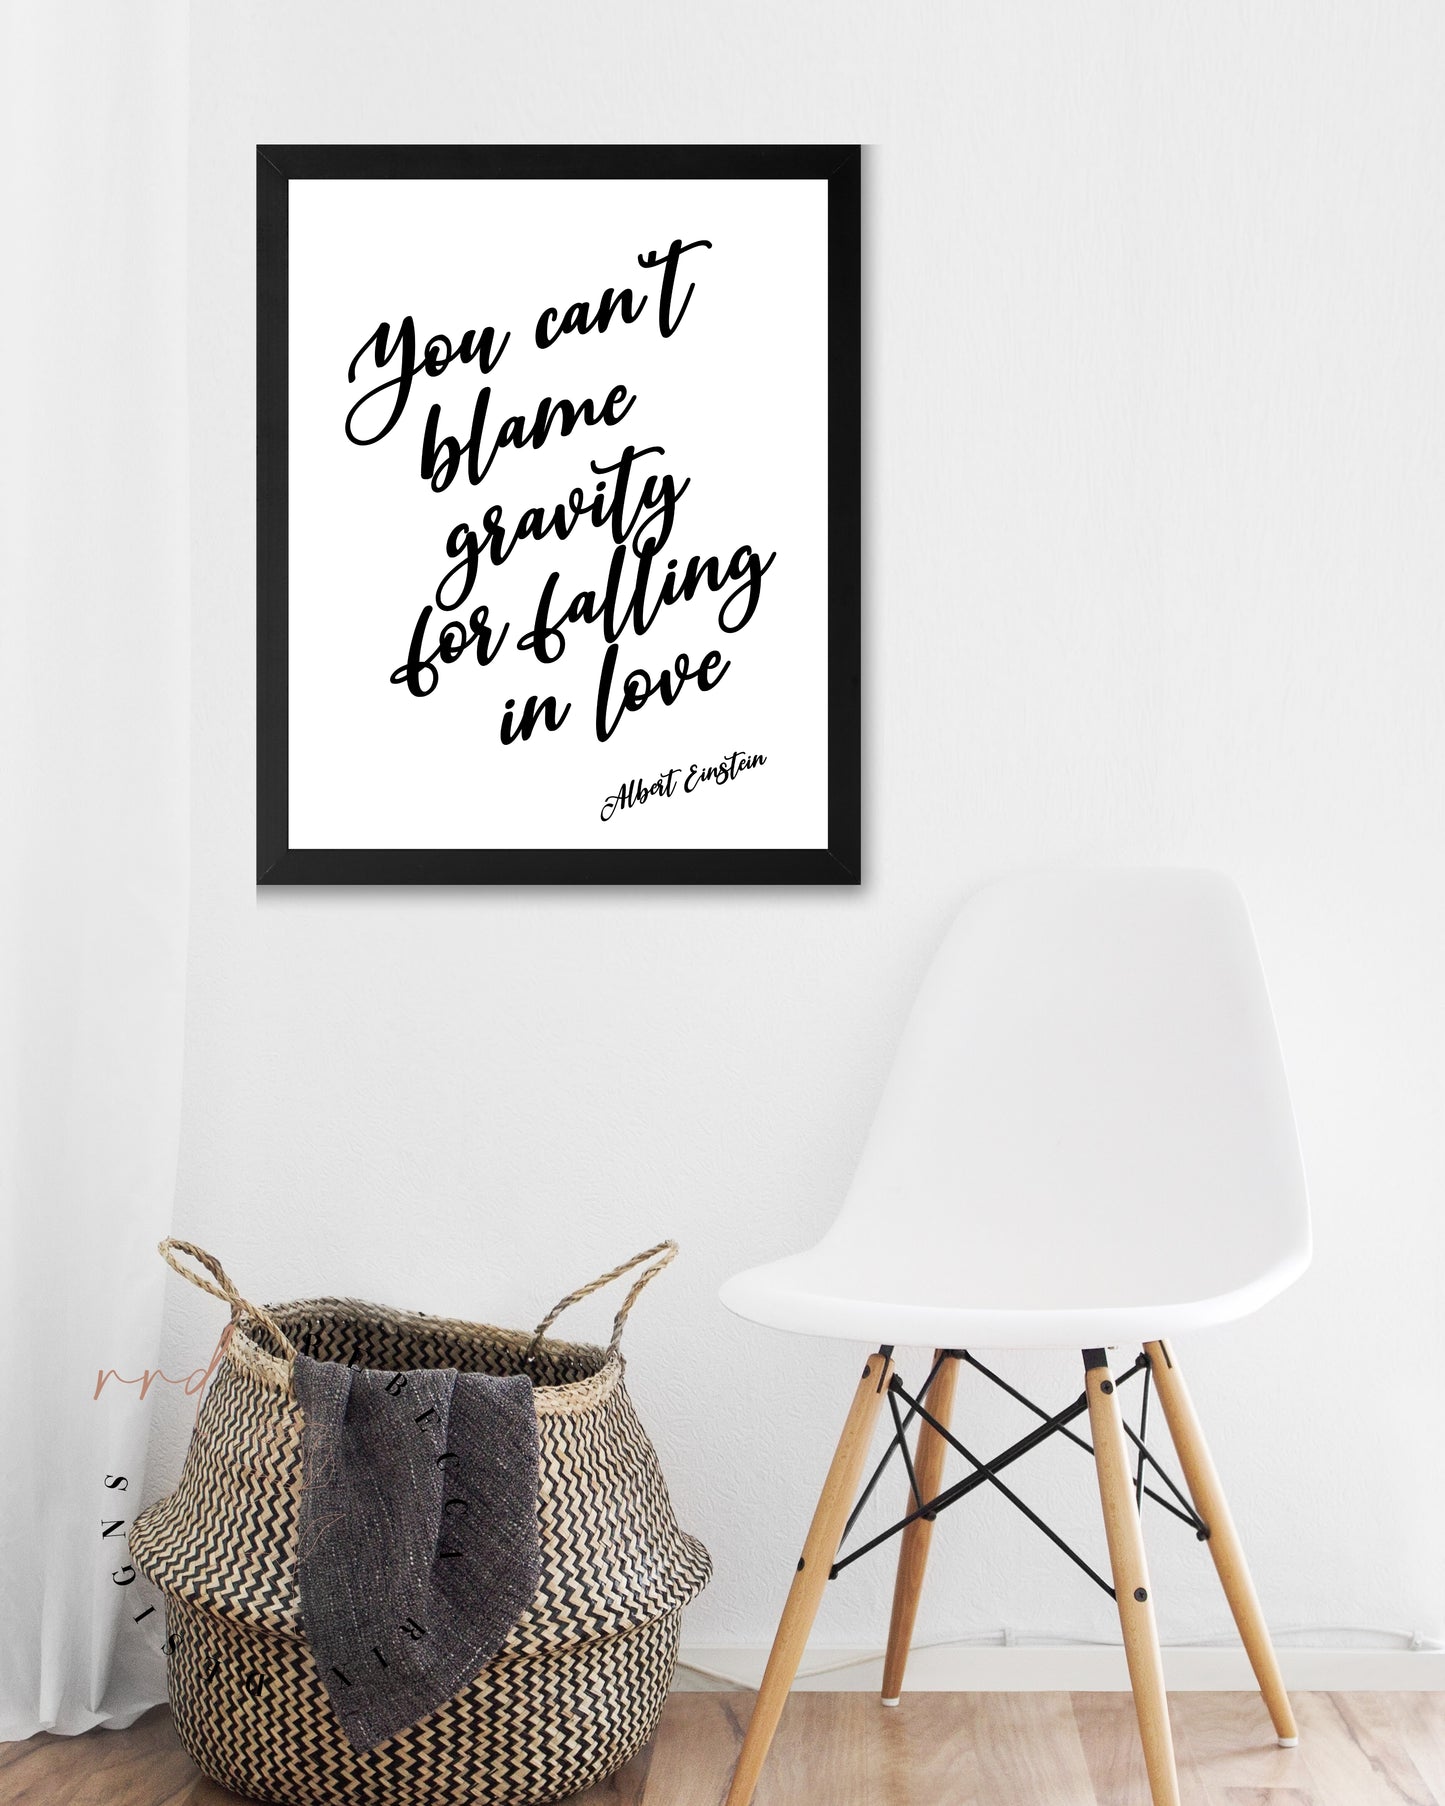 "You Can't Blame Gravity For Falling In Love" Famous Quote By Albert Einstein, Love Quotes, Printable Wall Art